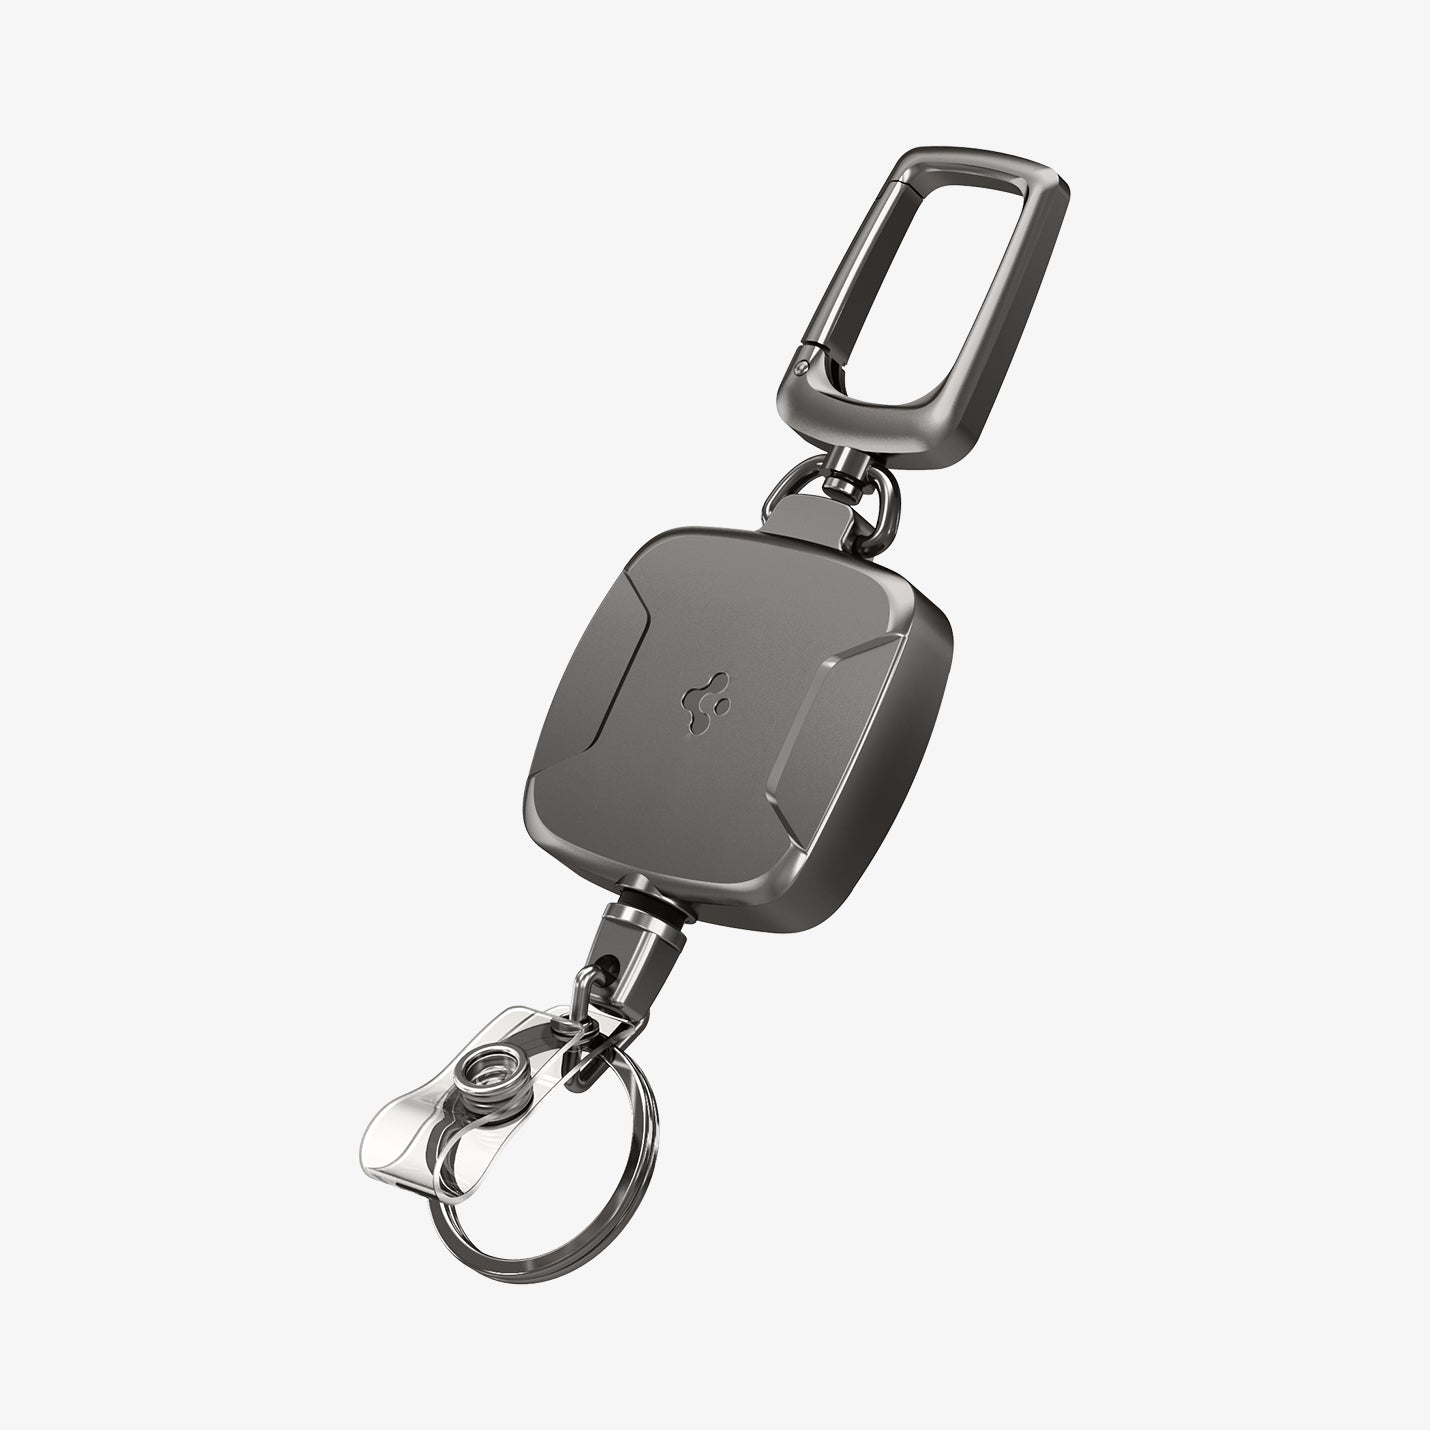 AHP03019 - Carabiner Reel Clip in black showing the front and side